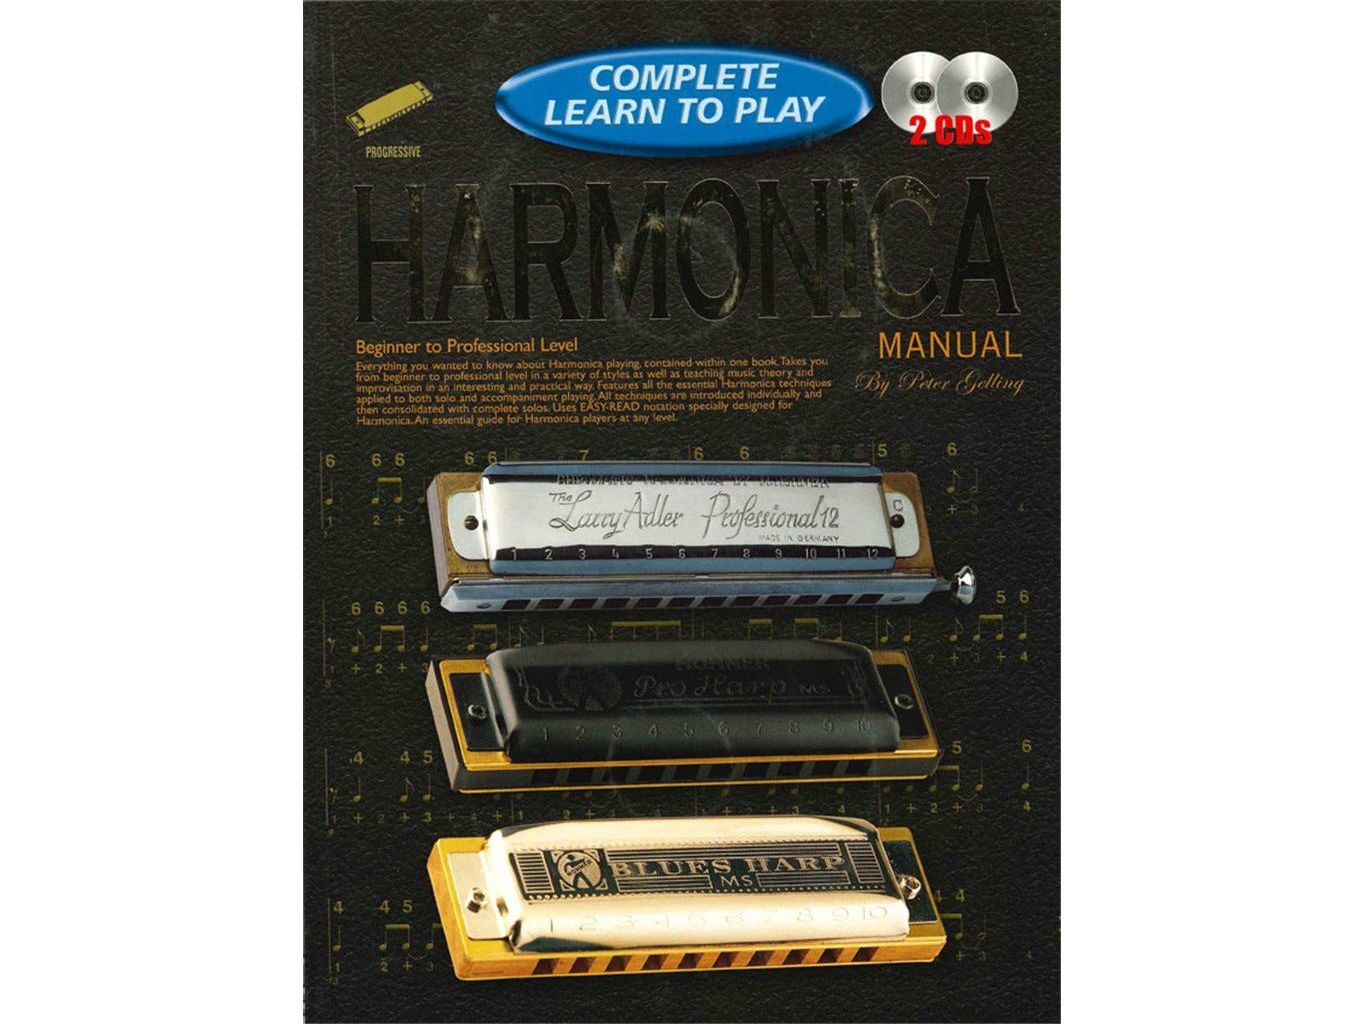 Complete Learn To Play Harmonica Manual + Cds